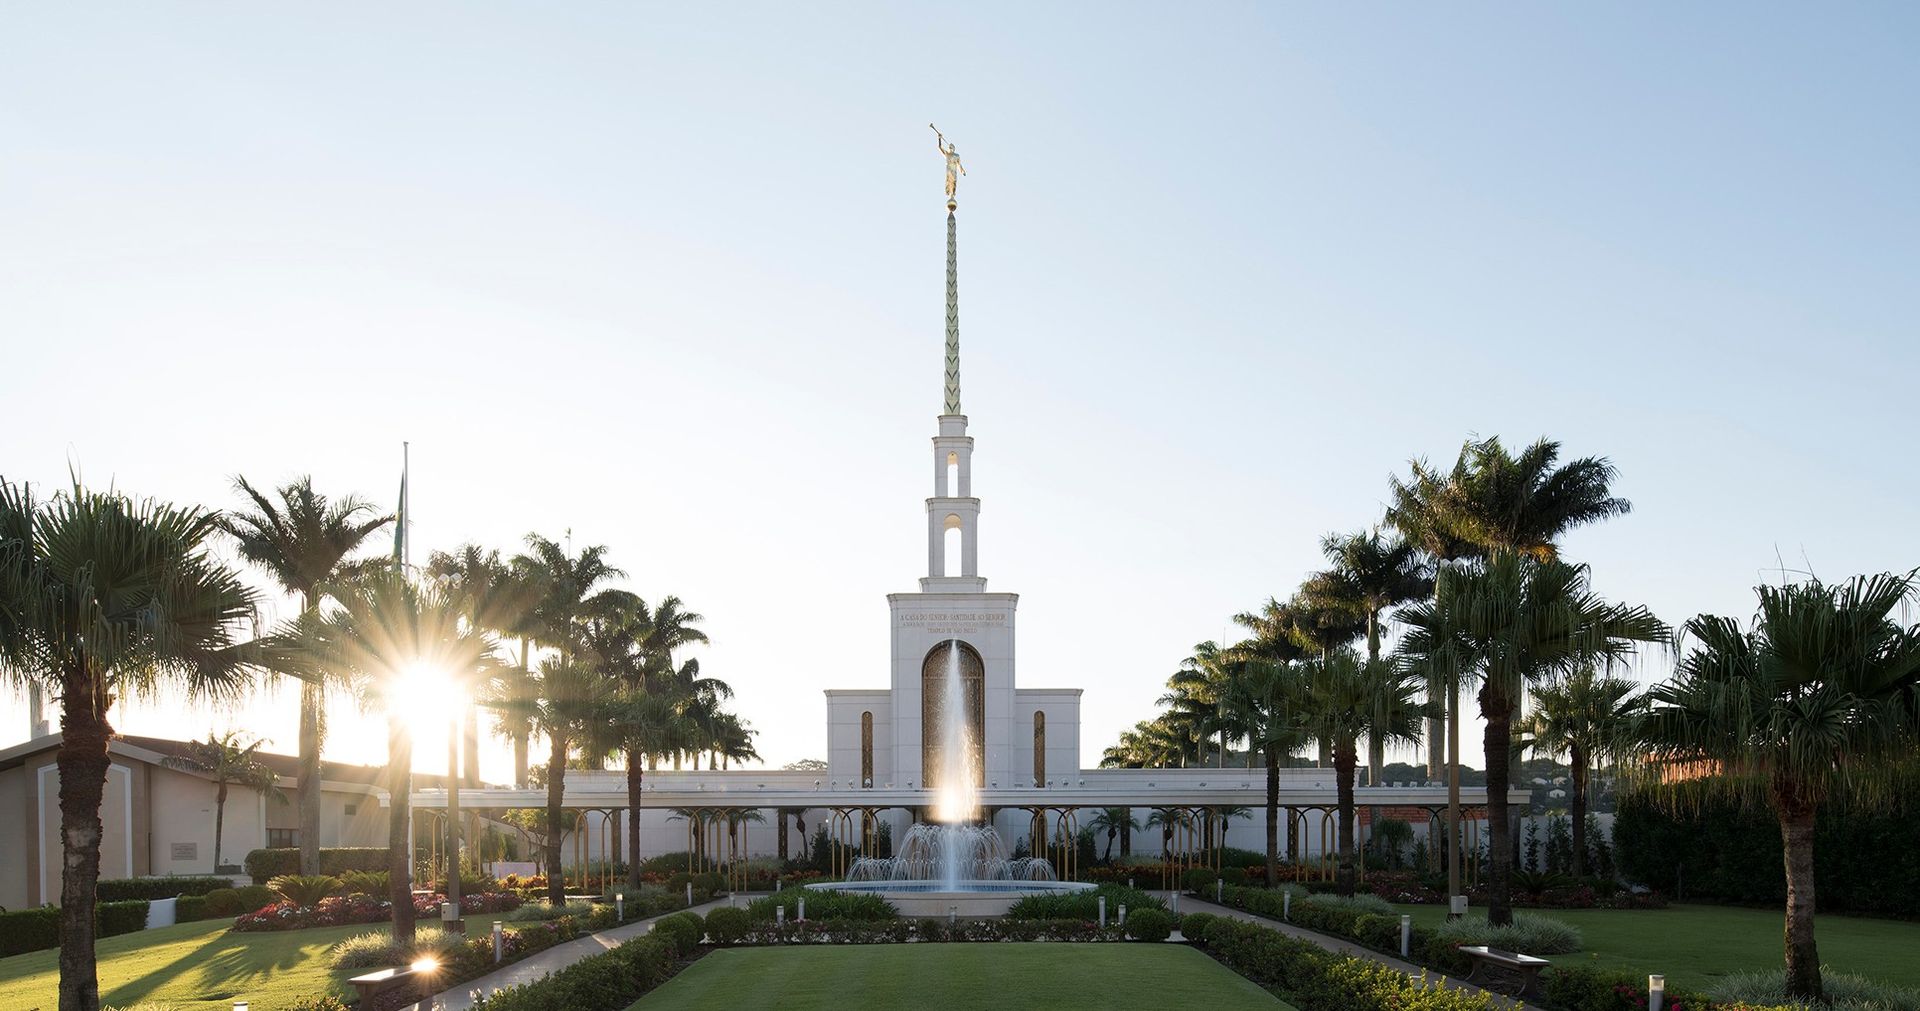 Exterior of the São Paulo Brazil Temple during the day.